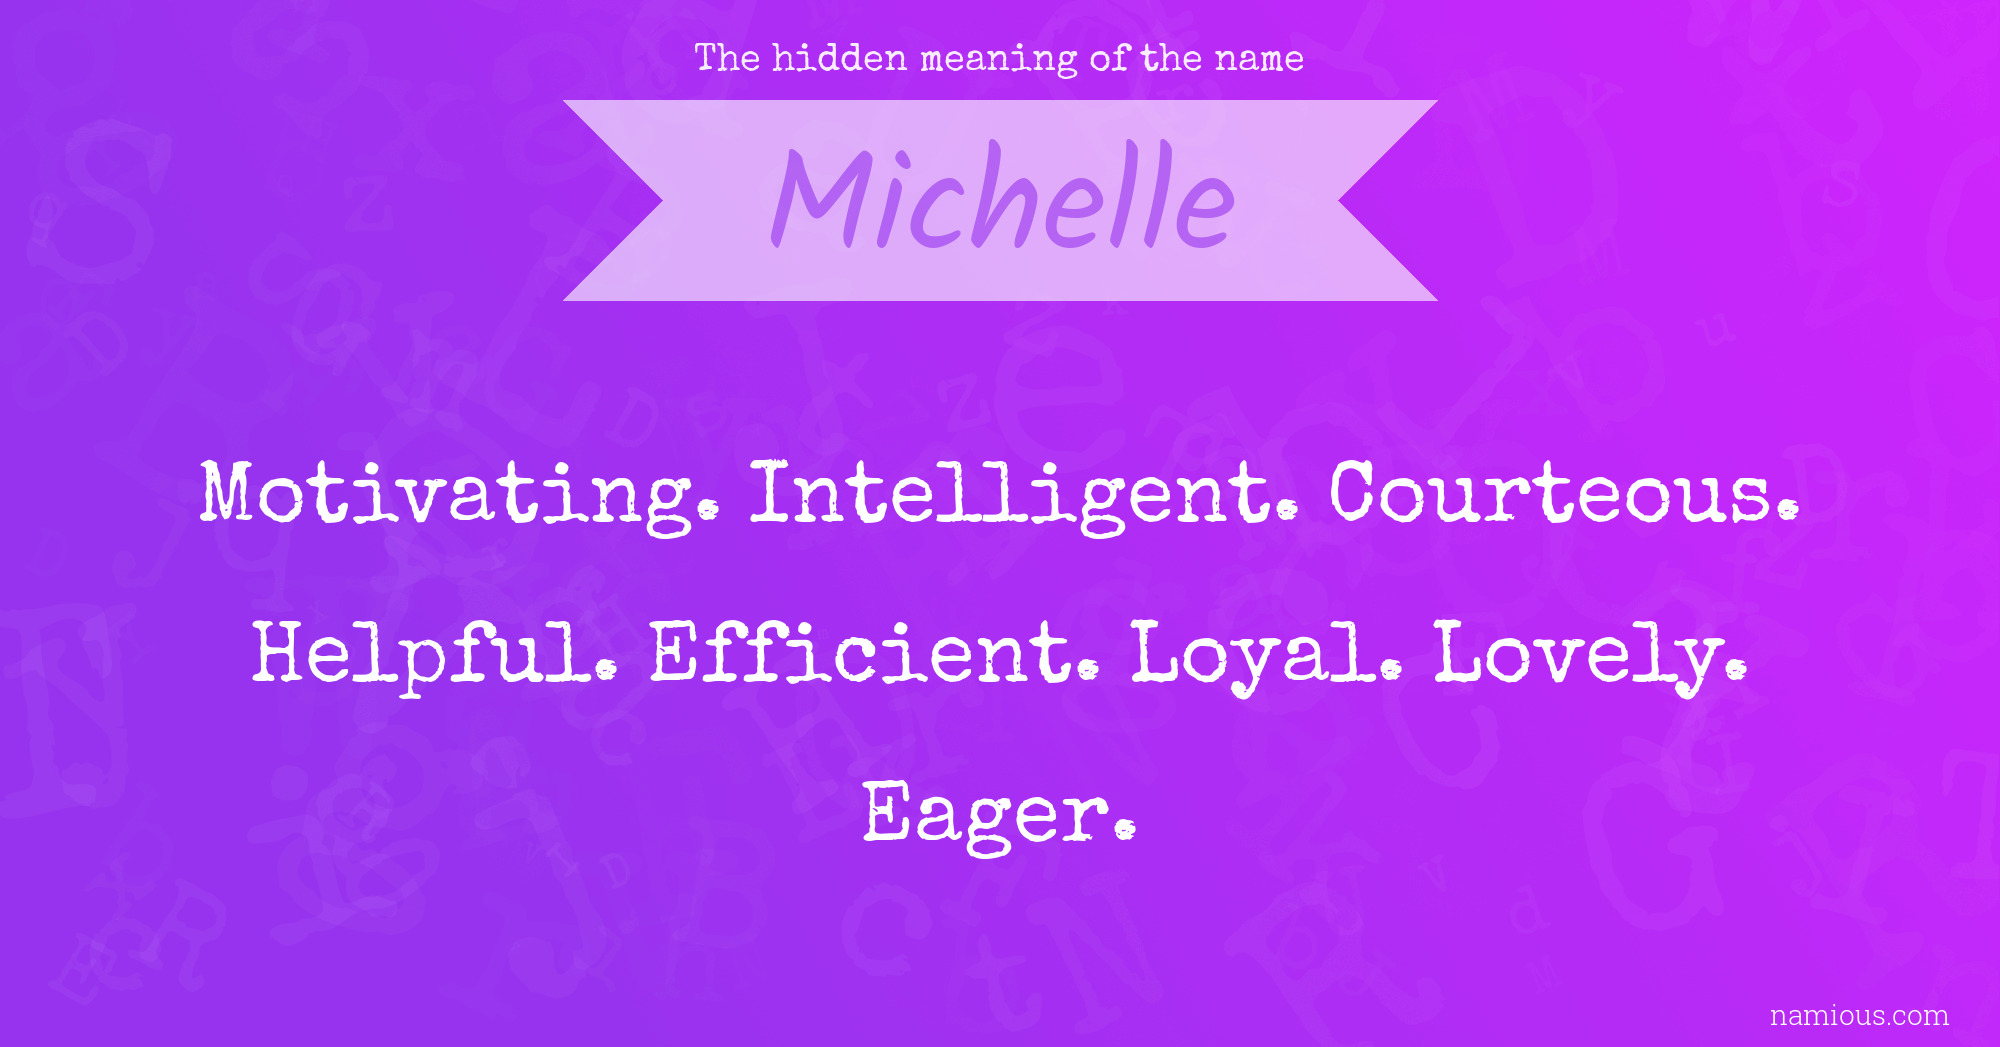 The hidden meaning of the name Michelle